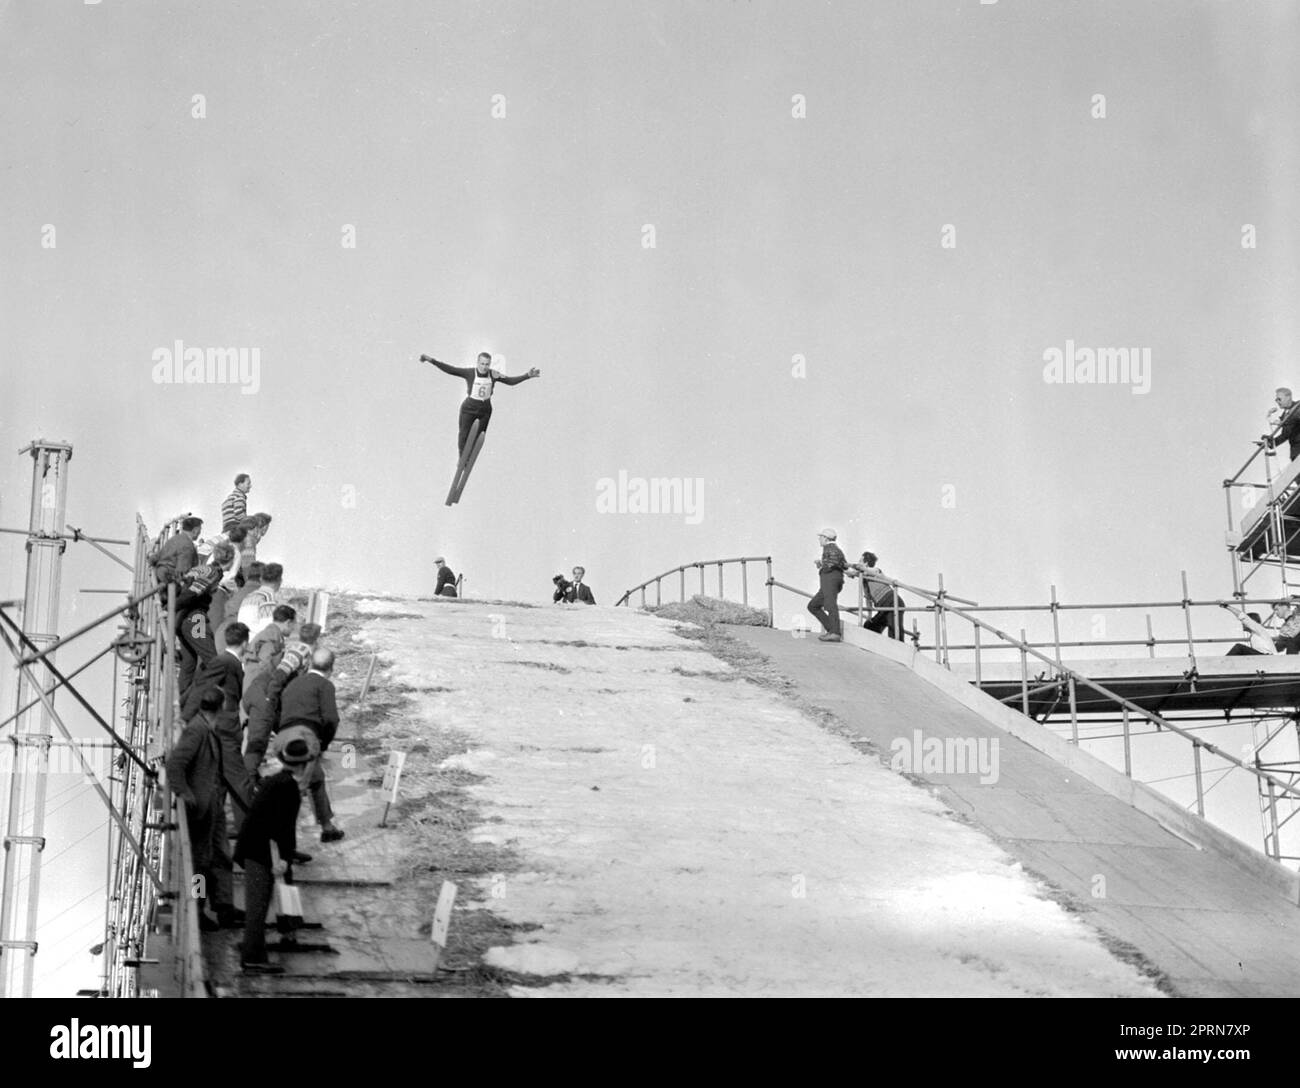 File photo dated 31-05-1961 of Harry Bergqvist, 28-year-old insurance agent and national champion of Sweden, flies without wings. He's taking off from the ski jump 150 feet high that's been built at Wembley Stadium, London, for the Internationbal Ski Jumping and Winter Sports Exhibition. Harry comes from Sundsvall, Sweden. Wembley was not just a football venue. Here, Harry Bergqvist, a 28-year-old insurance agent and national champion of Sweden, took on a 150-foot high ski jump built for the International Ski Jumping and Winter Sports Exhibition in May 1961. Issue date: Thursday April 27, 2023 Stock Photo